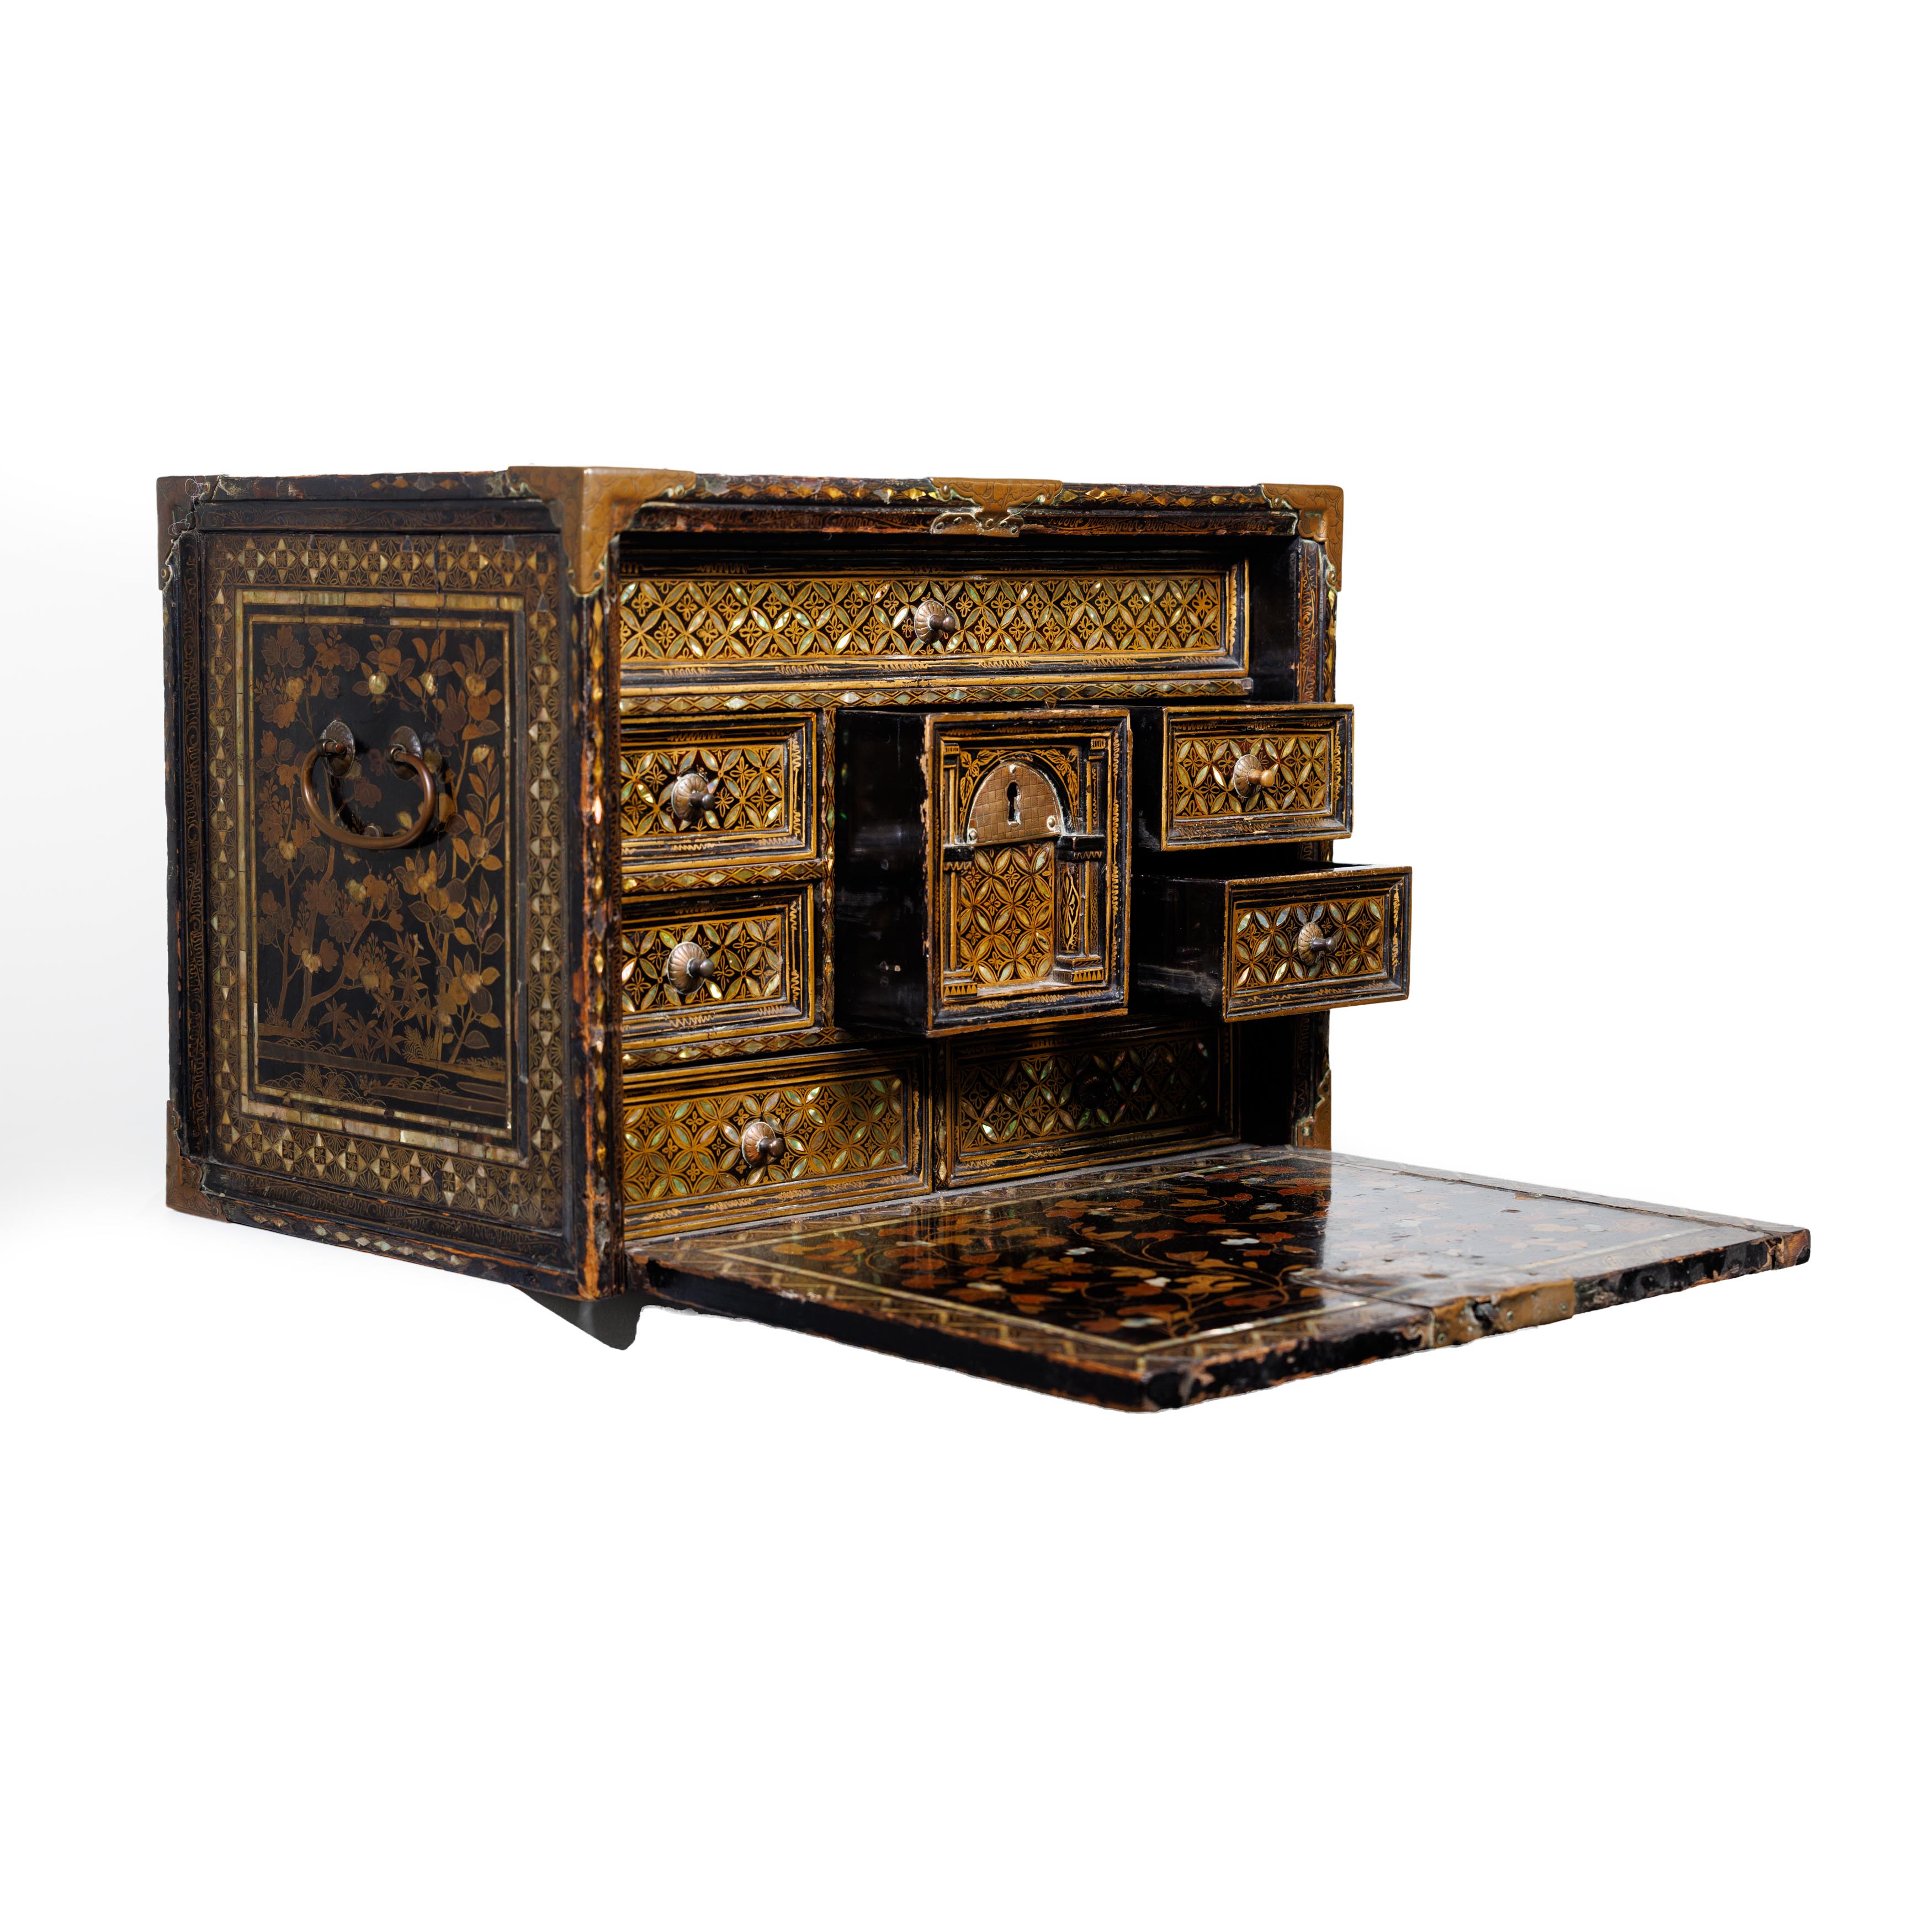 A Japanese Namban black lacquered, mother of pearl inlaid and gilt decorated cabinet Momoyama pe...